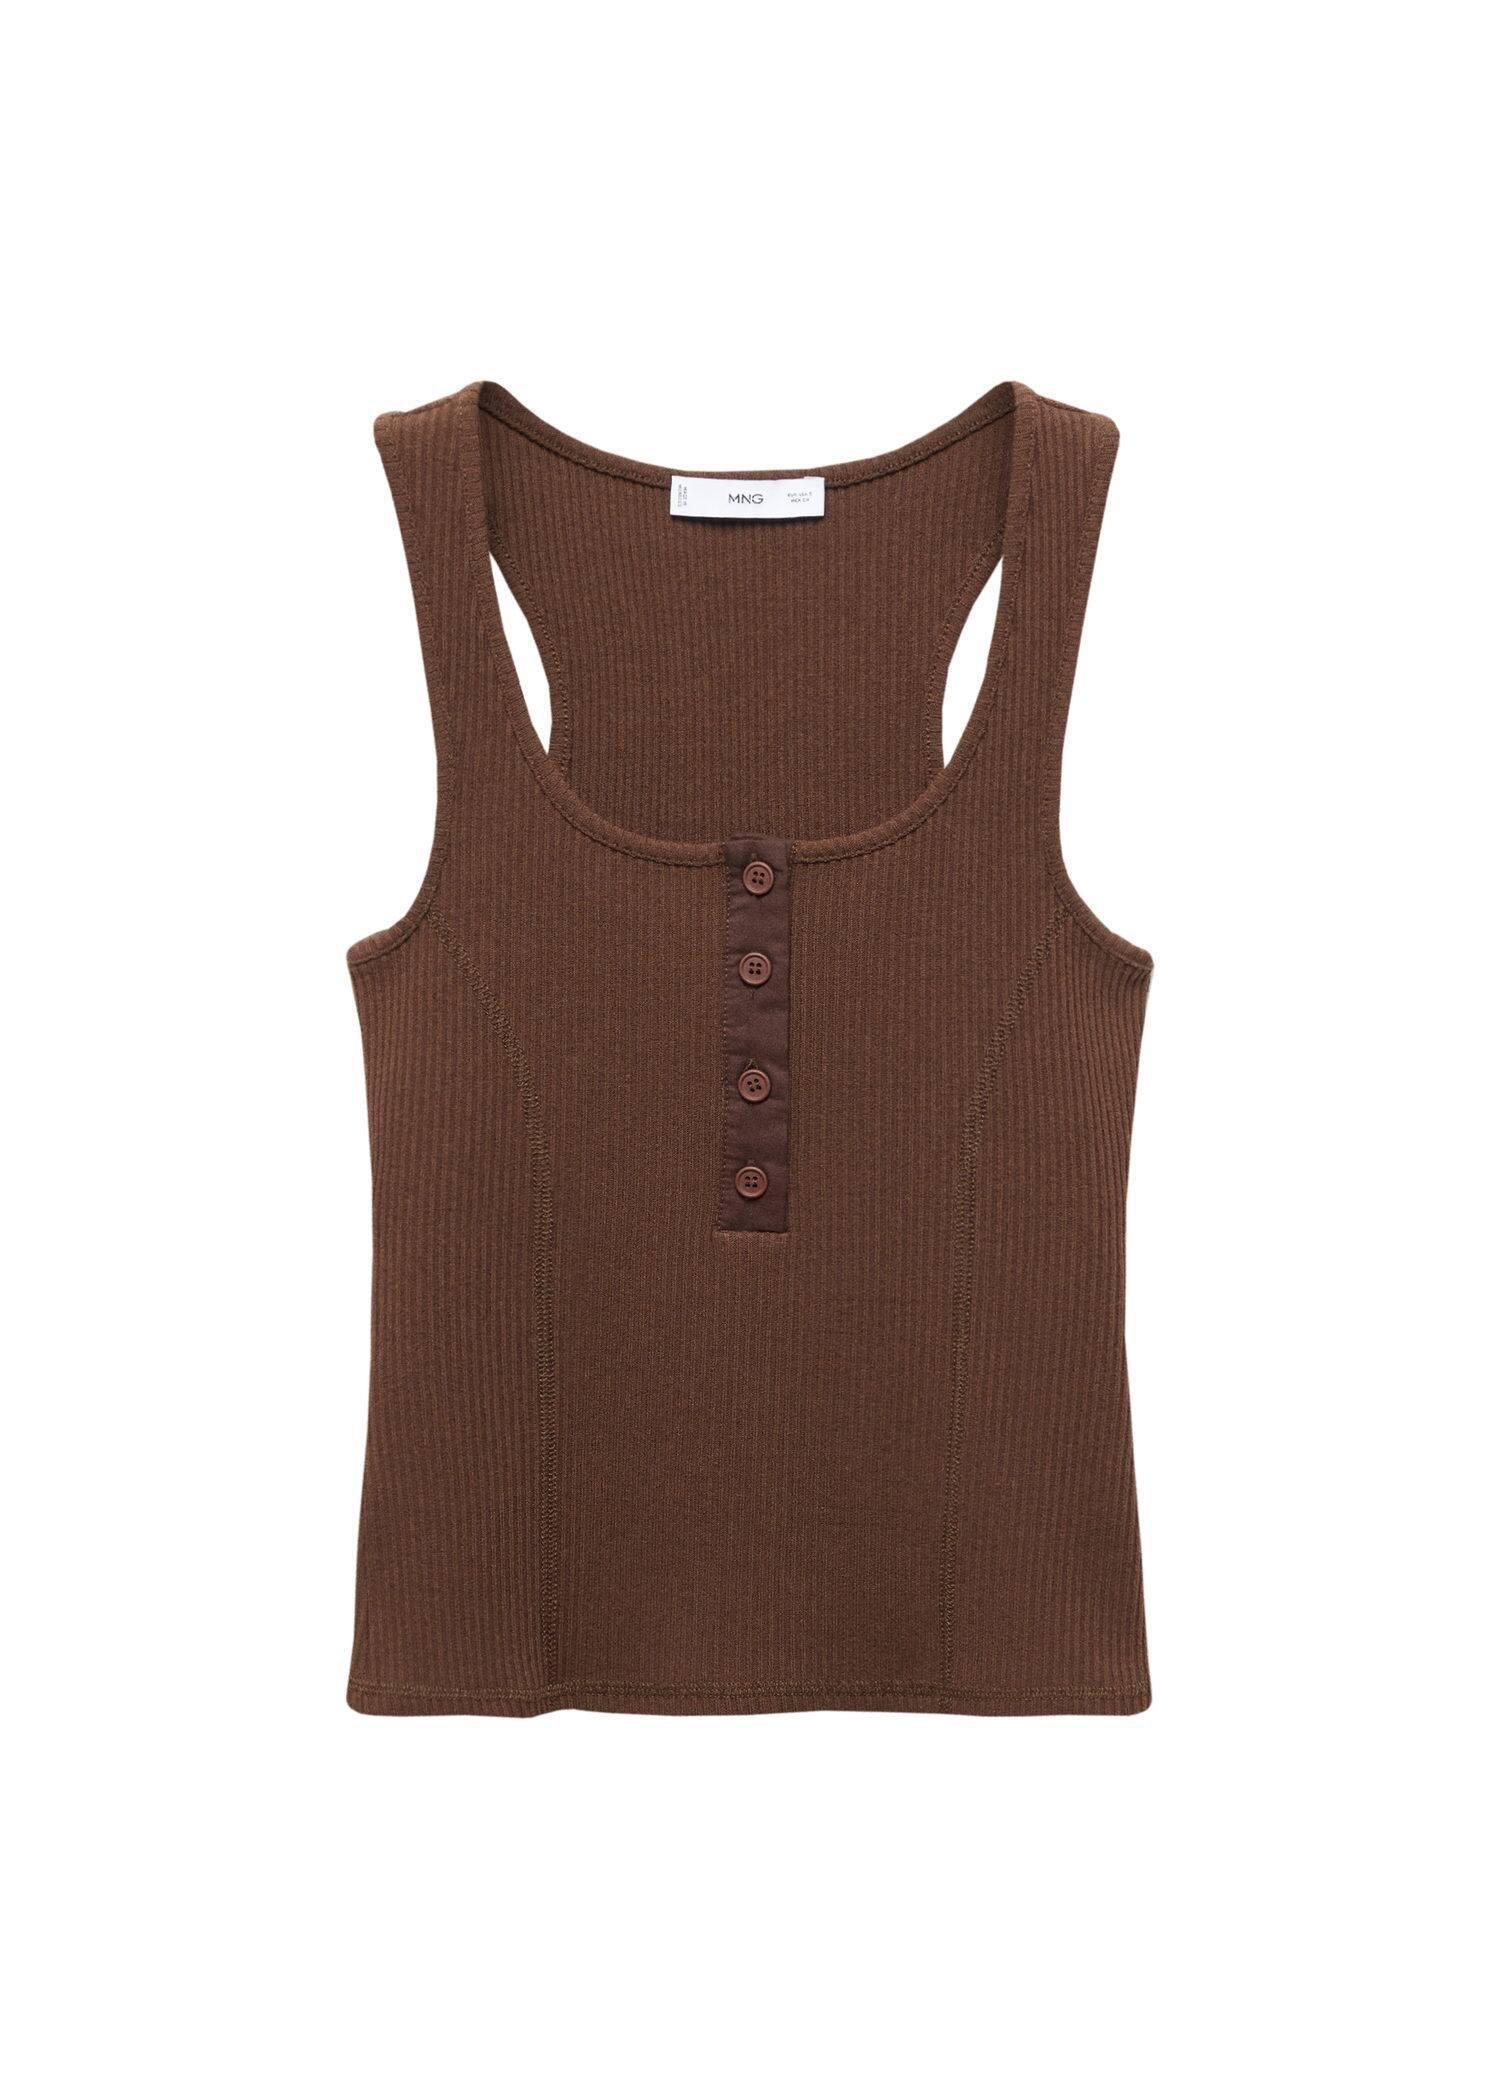 Mango - Brown Buttoned Ribbed Top